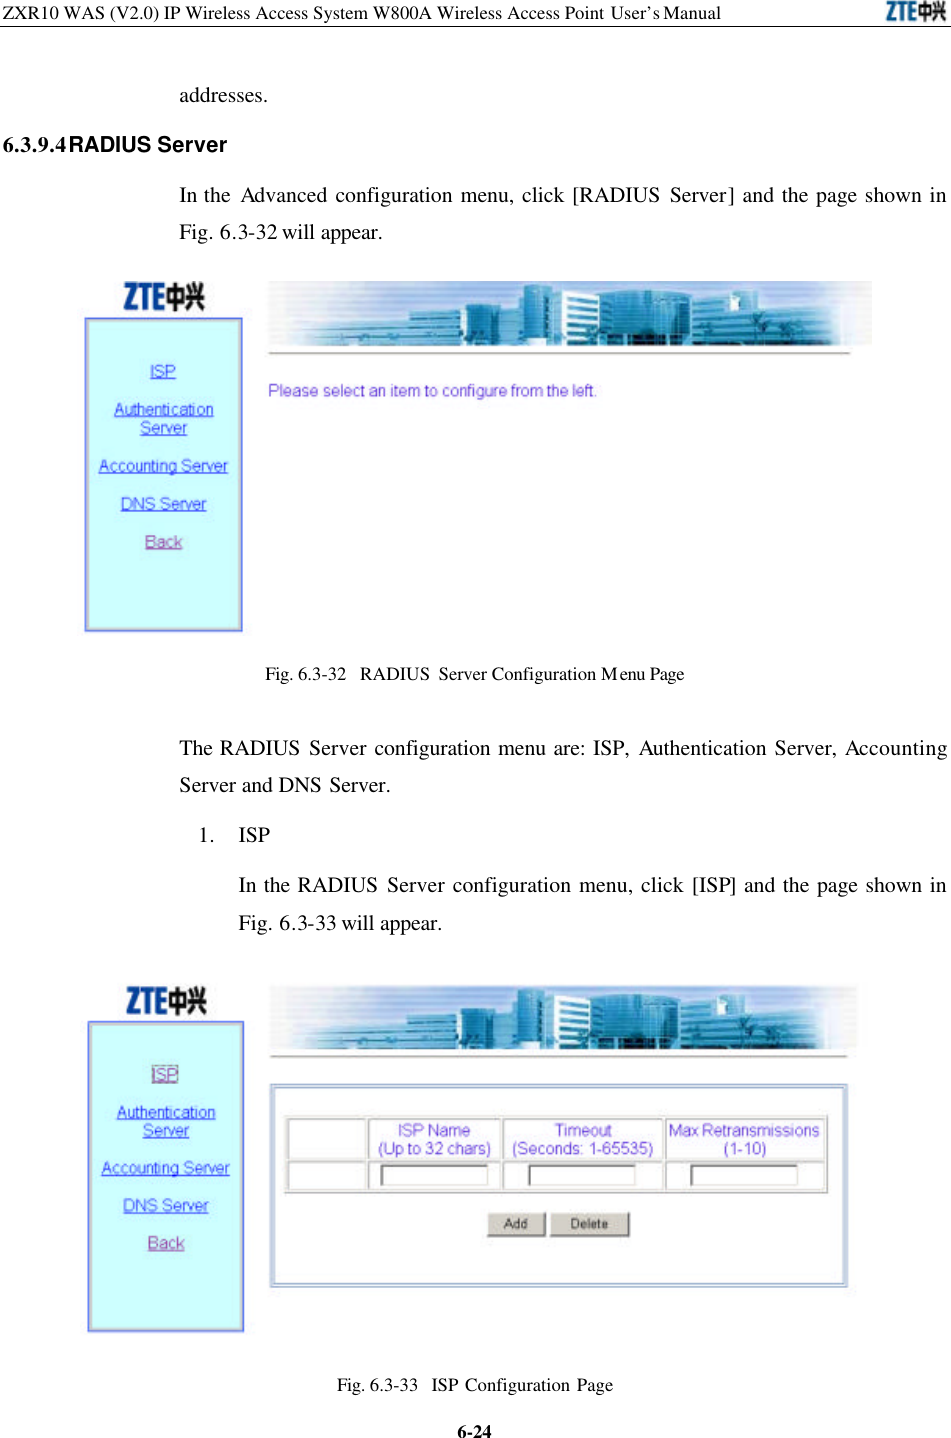 ZXR10 WAS (V2.0) IP Wireless Access System W800A Wireless Access Point User’s Manual  6-24addresses.   6.3.9.4 RADIUS Server In the Advanced configuration menu, click [RADIUS Server] and the page shown in Fig. 6.3-32 will appear.    Fig. 6.3-32  RADIUS Server Configuration Menu Page The RADIUS Server configuration menu are: ISP, Authentication Server, Accounting Server and DNS Server.   1. ISP   In the RADIUS Server configuration menu, click [ISP] and the page shown in Fig. 6.3-33 will appear.    Fig. 6.3-33  ISP Configuration Page  